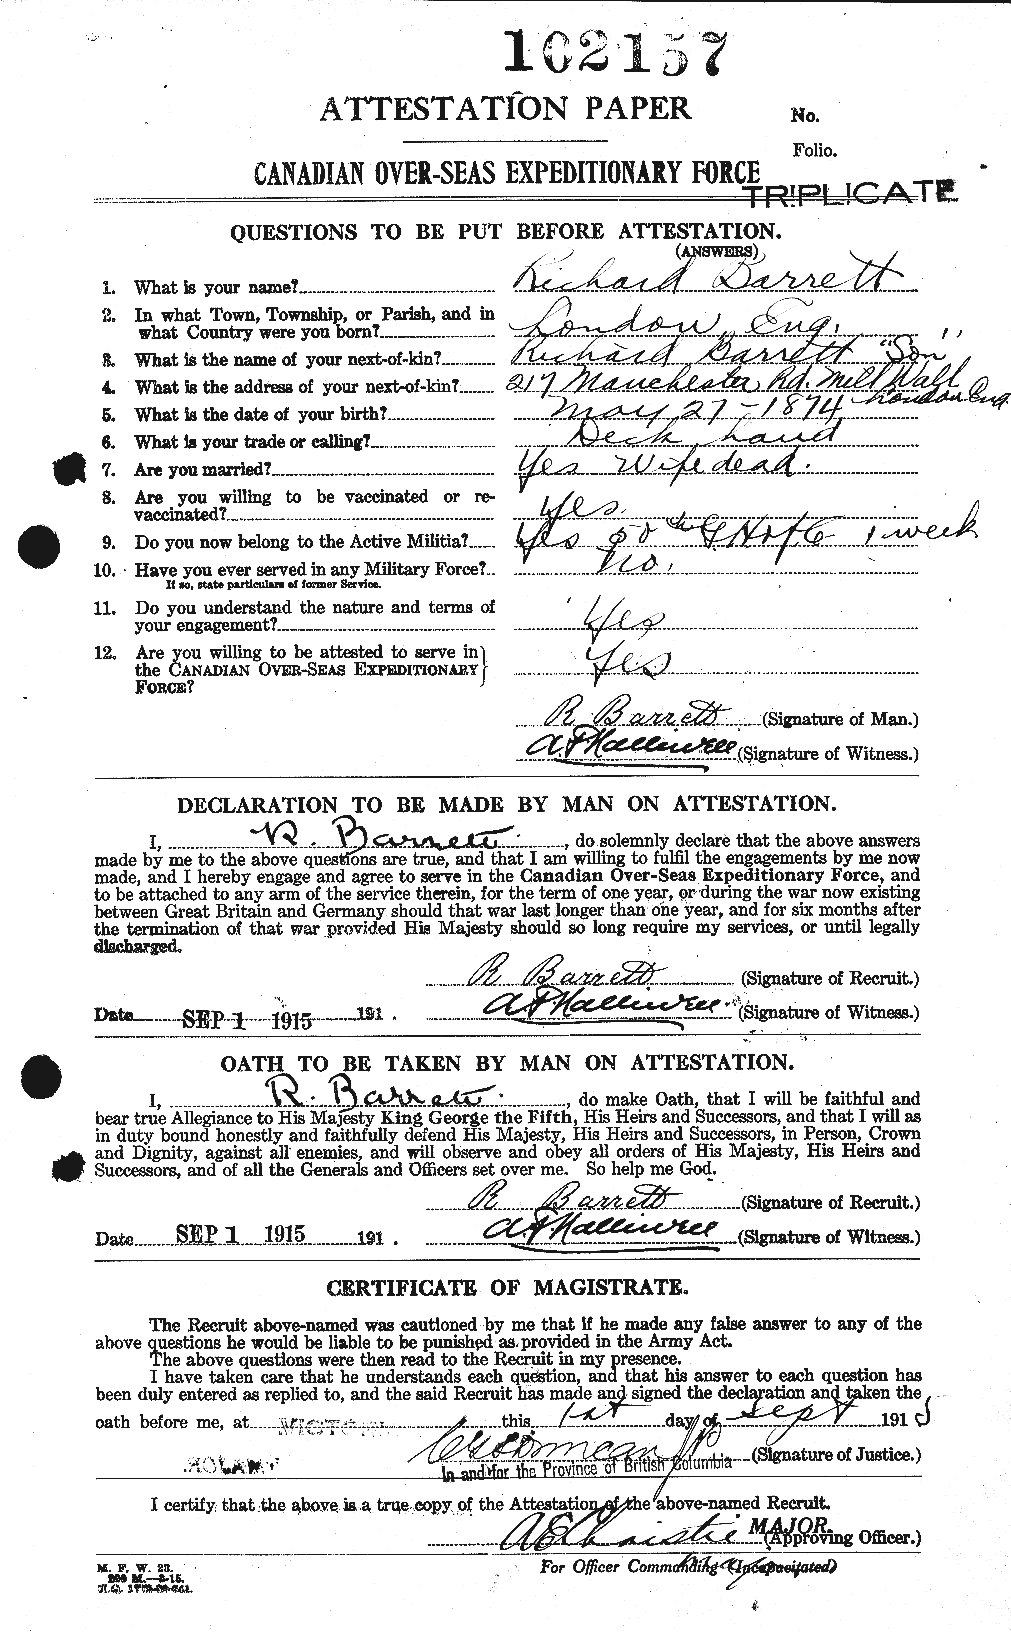 Personnel Records of the First World War - CEF 220196a